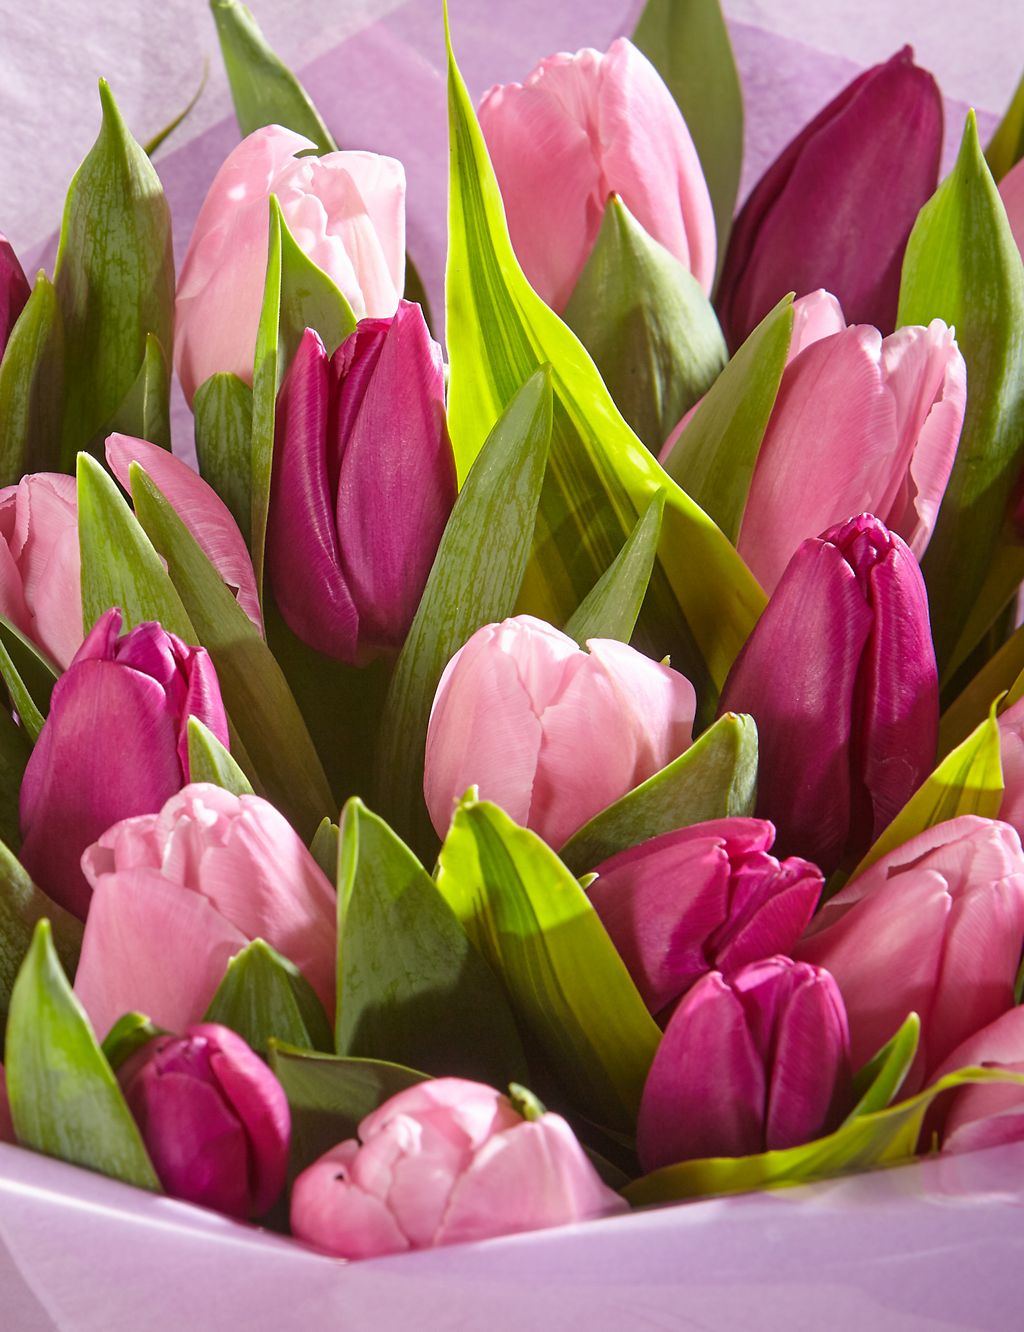 Large Mother’s Day Tulip Gift Bag - Free Chocolates worth £5 (Free Delivery from 21-28 March) 5 of 5